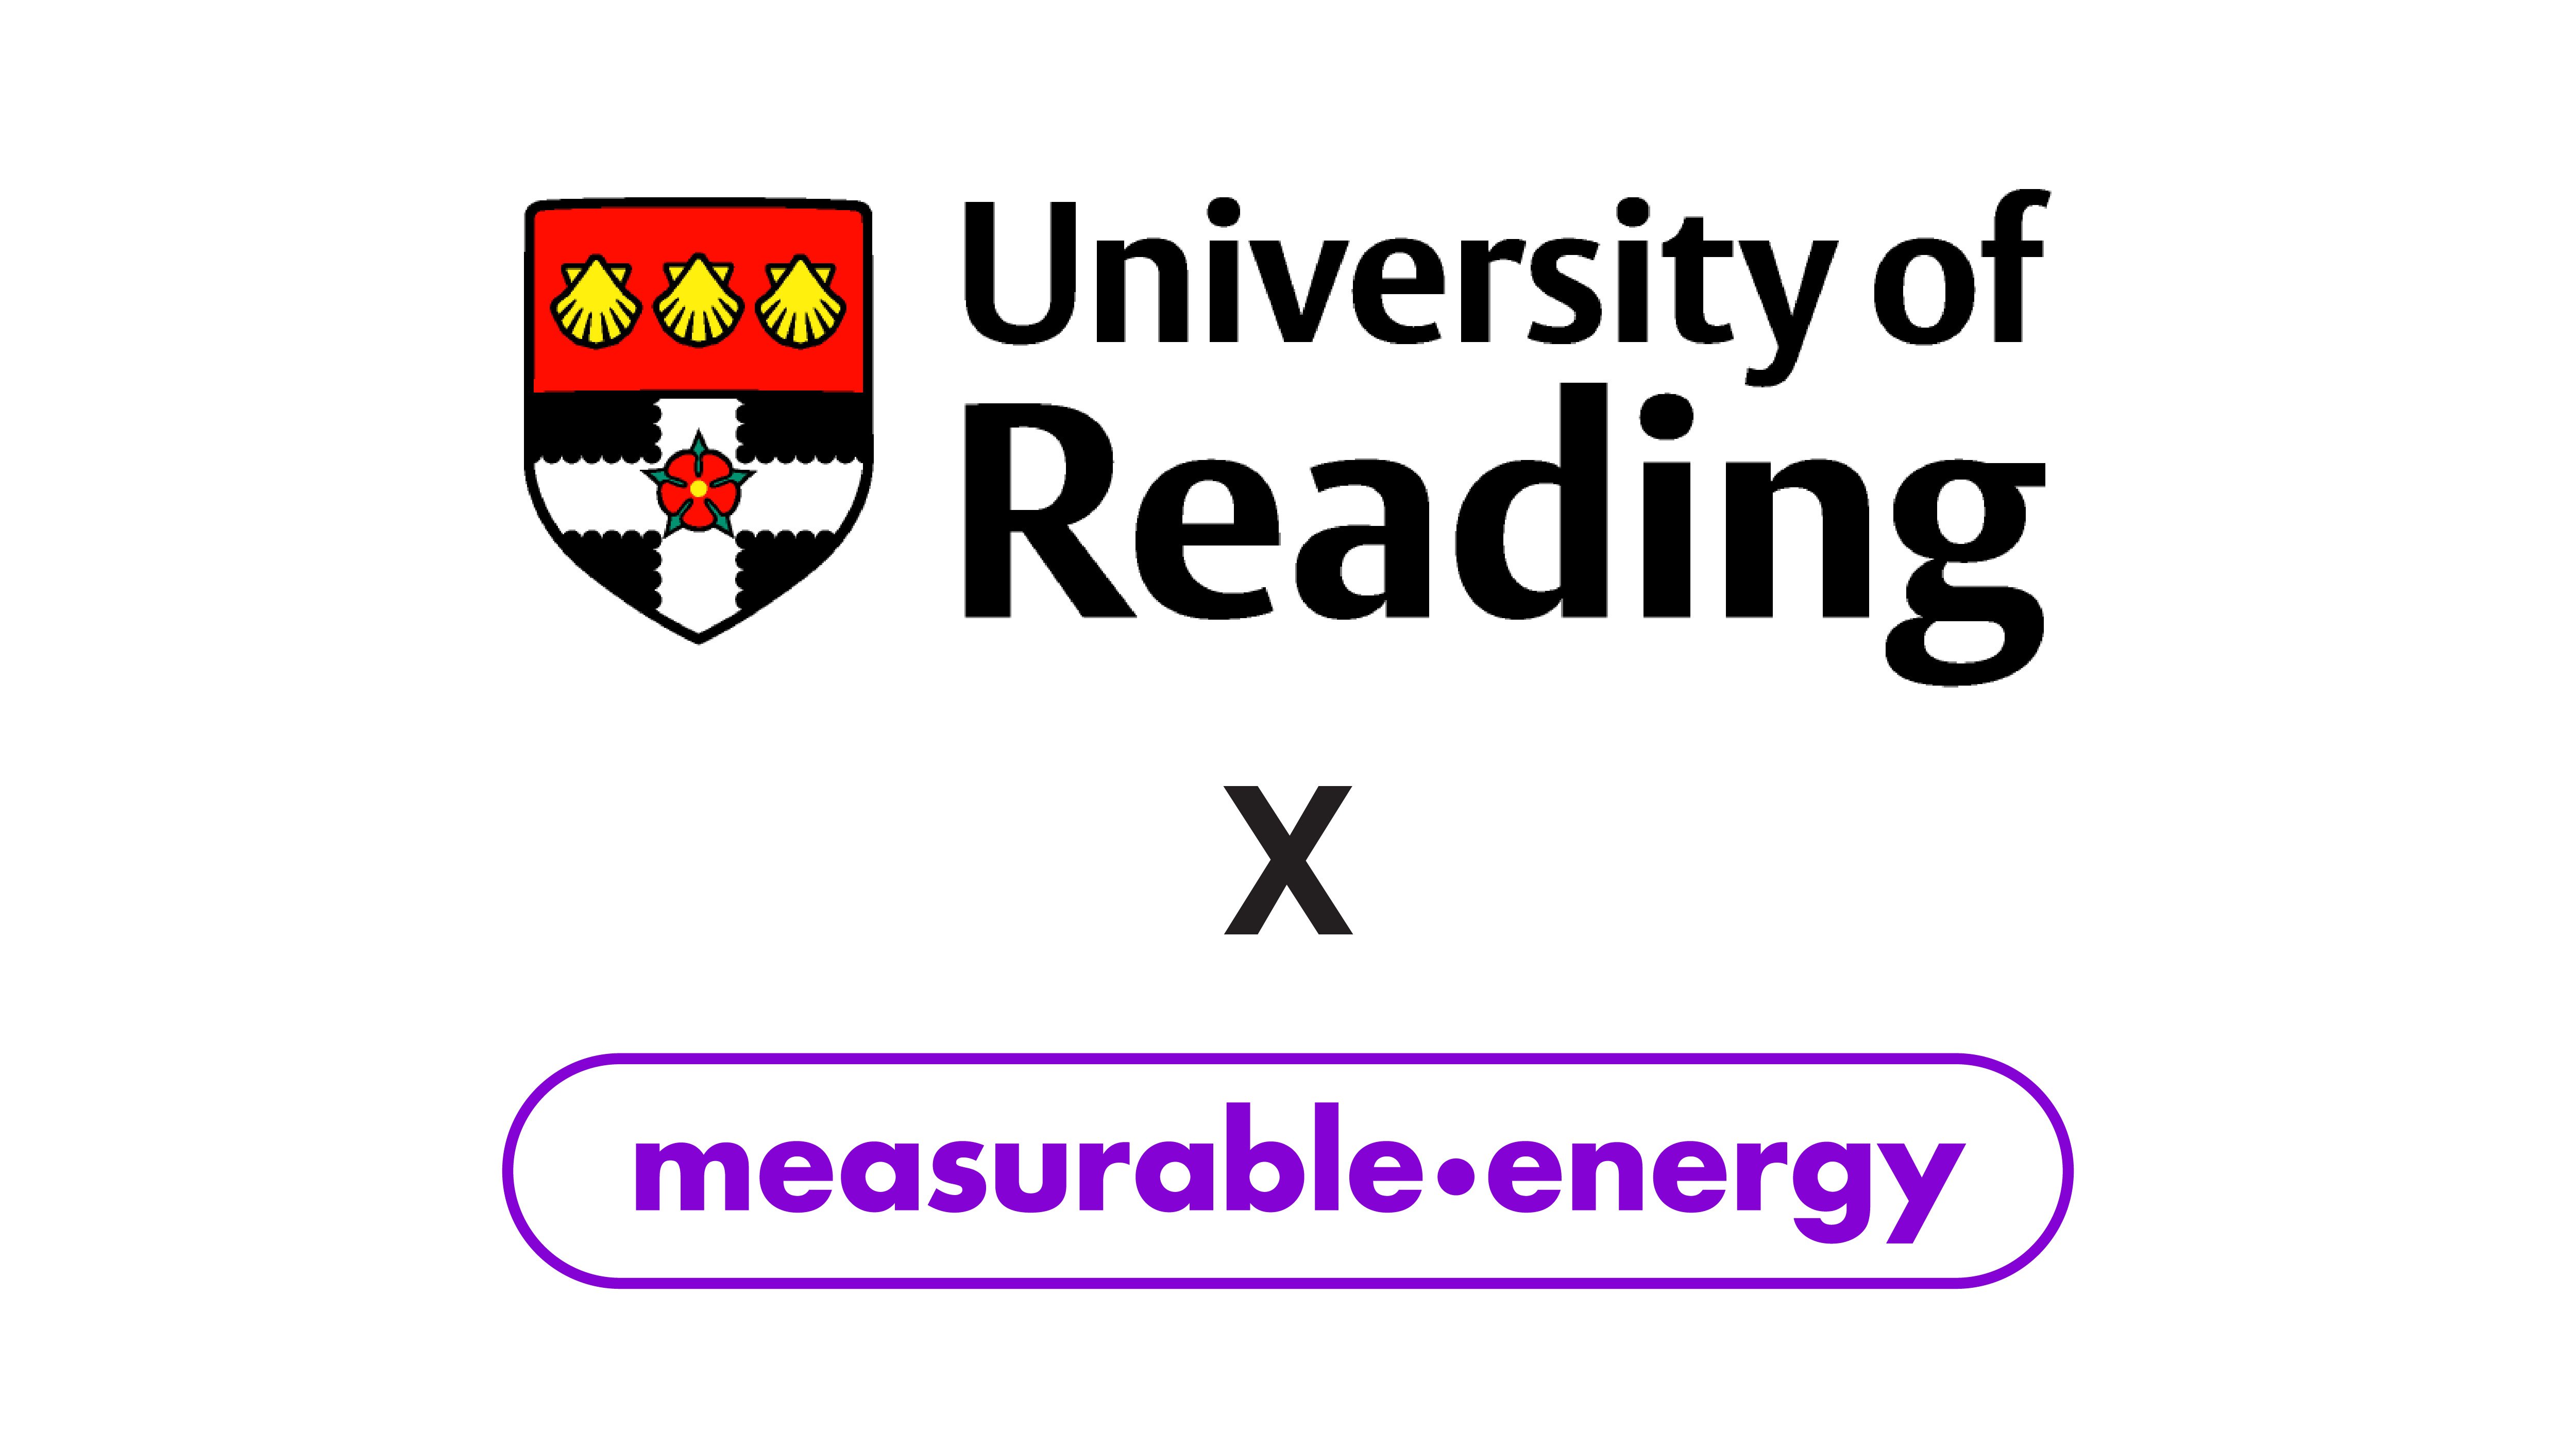 University of Reading and measurable.energy logo on a white background.